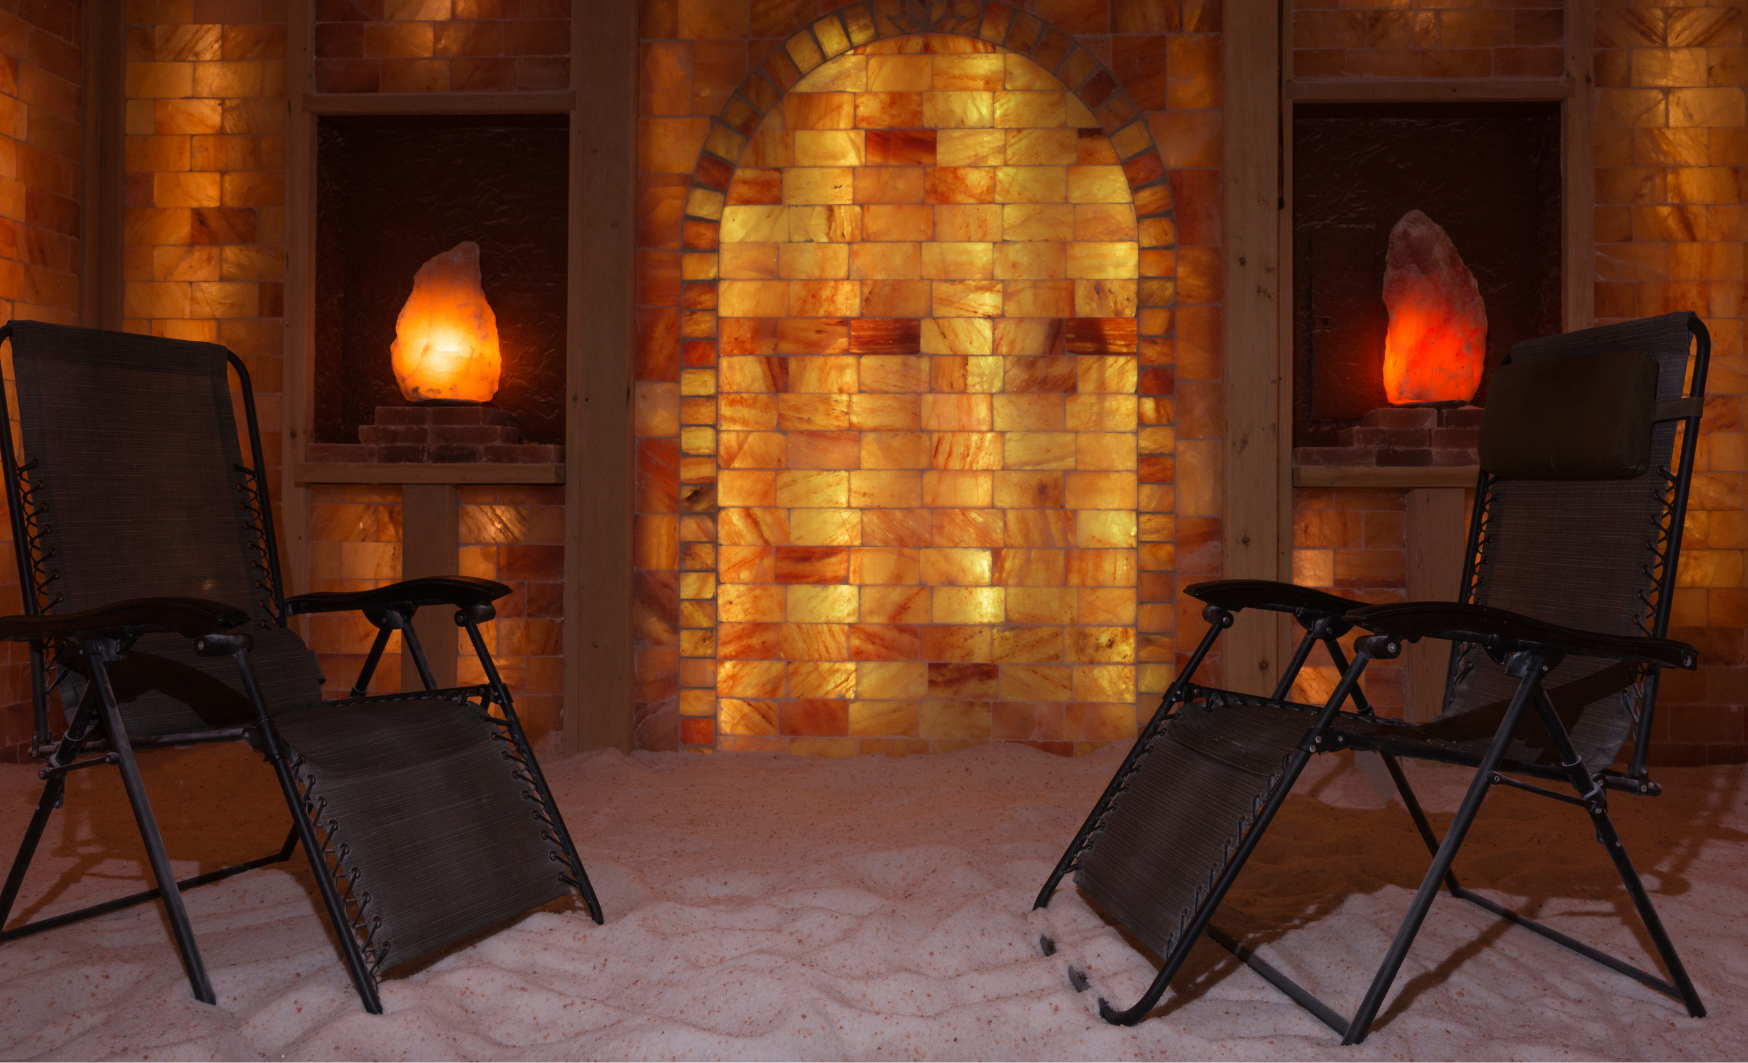 The Salt Cave Experience: What’s It Like To Be In A Halotherapy Room?